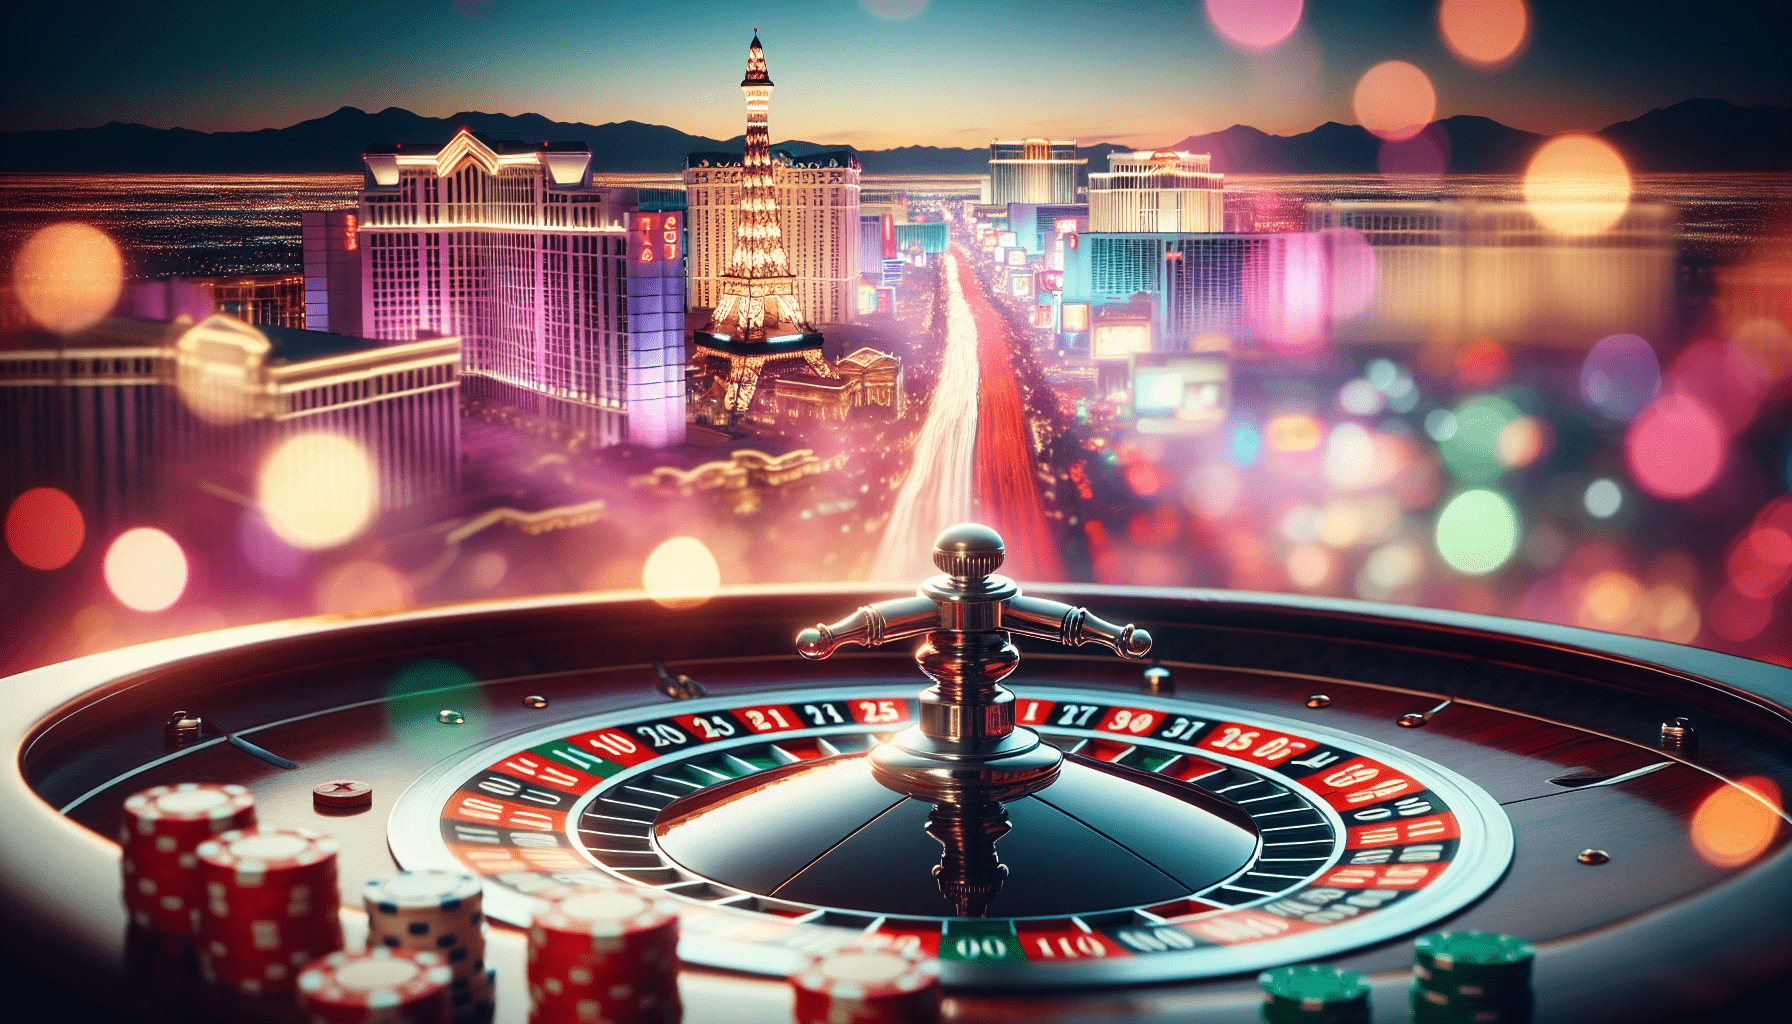 What Are The Best Strategies For Playing Roulette In Las Vegas Casinos?